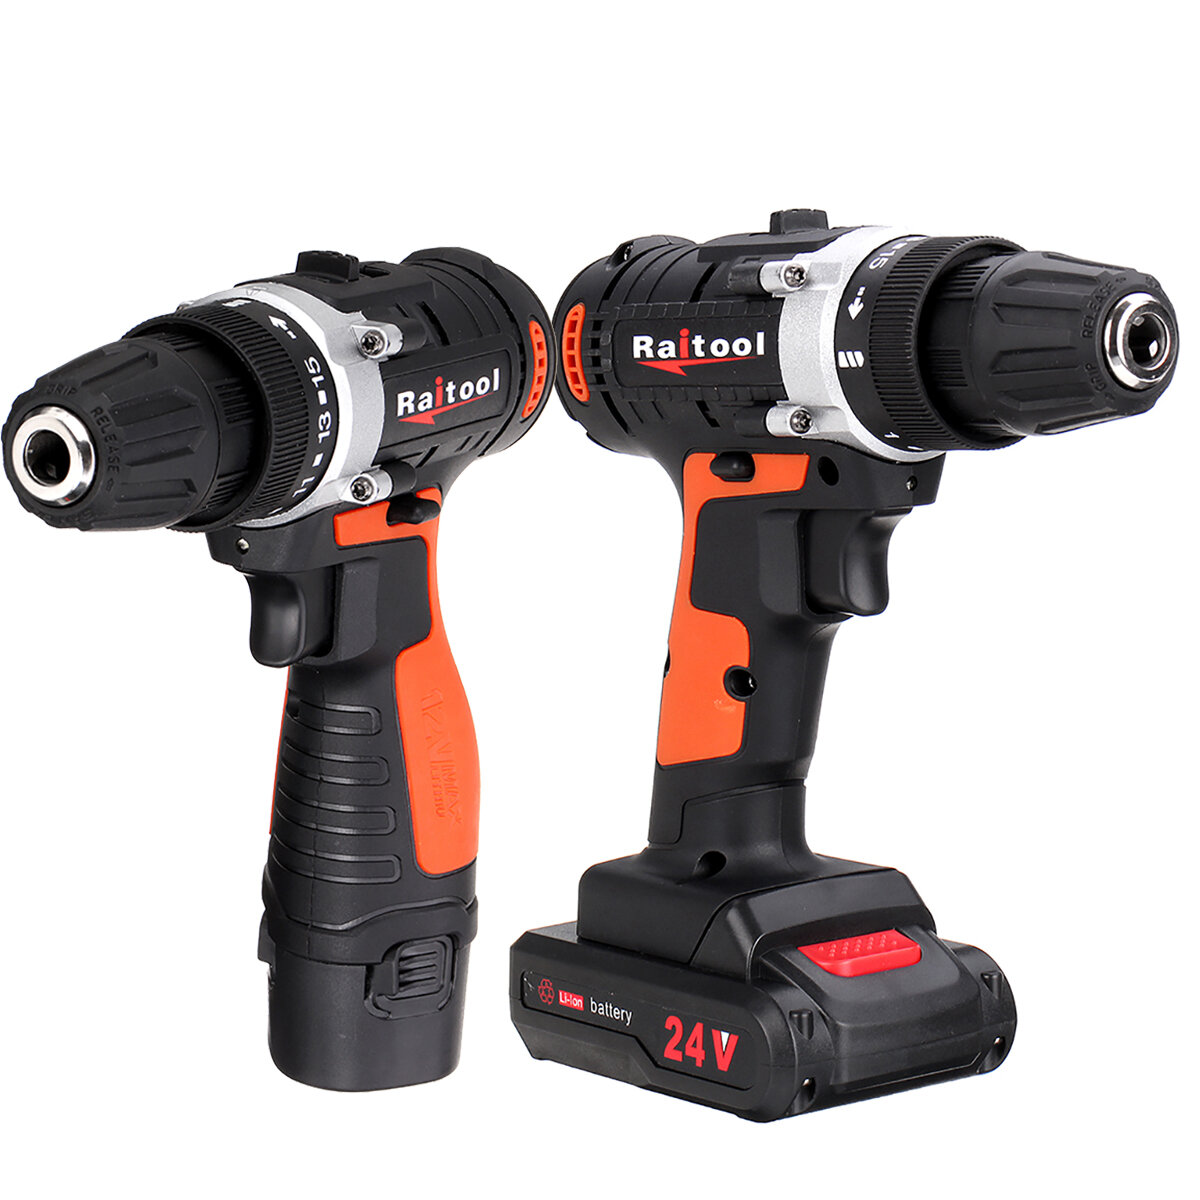 Image of Raitool 12V/24V Lithium Battery Power Drill Cordless Rechargeable 2 Speed Electric Drill